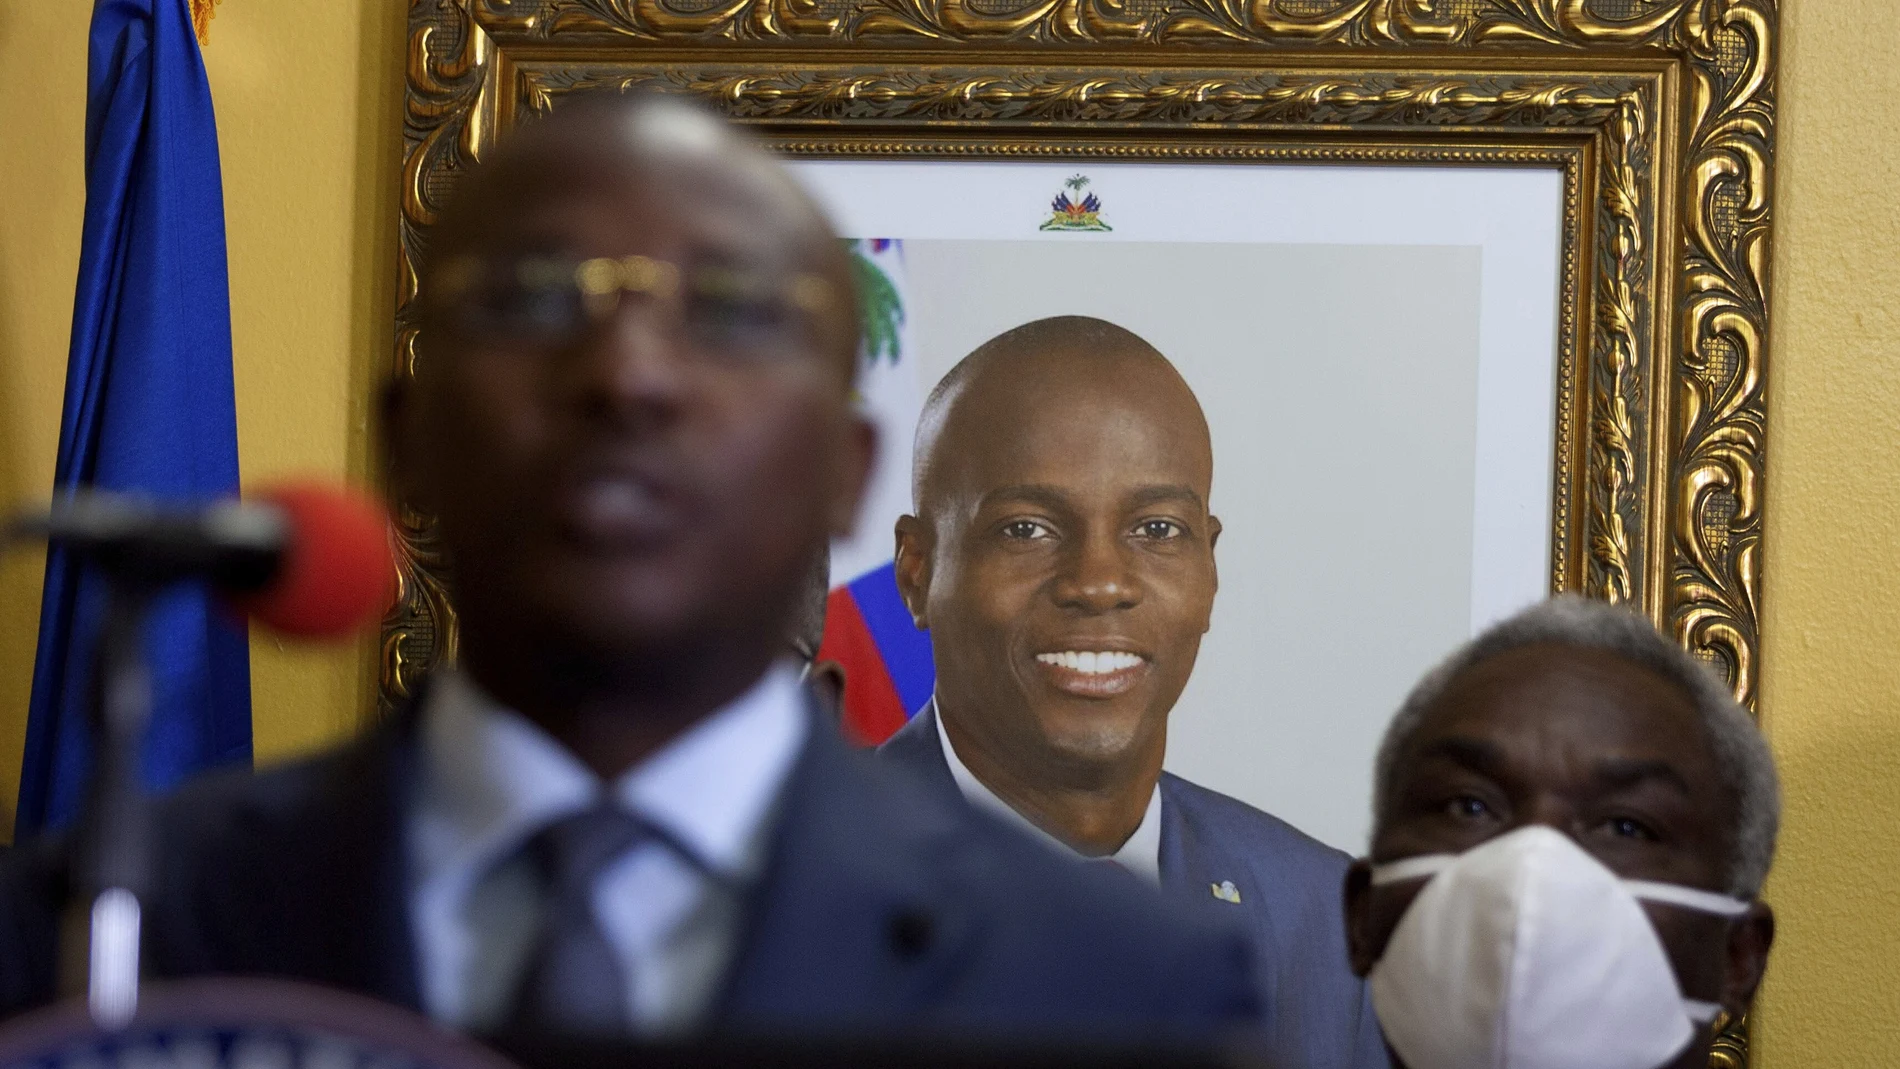 A picture of late Haitian President Jovenel Moise hangs on the wall of his former residence, behind interim Prime Minister Claude Joseph giving a press conference in Port-au-Prince, Tuesday, July 13, 2021. Authorities in Haiti on Thursday forcefully pushed back against reports that current government officials were involved in the July 7 killing of Haitian President Jovenel MoÃ¯se, calling them â€œa lie.â€ (AP Photo/Joseph Odelyn)